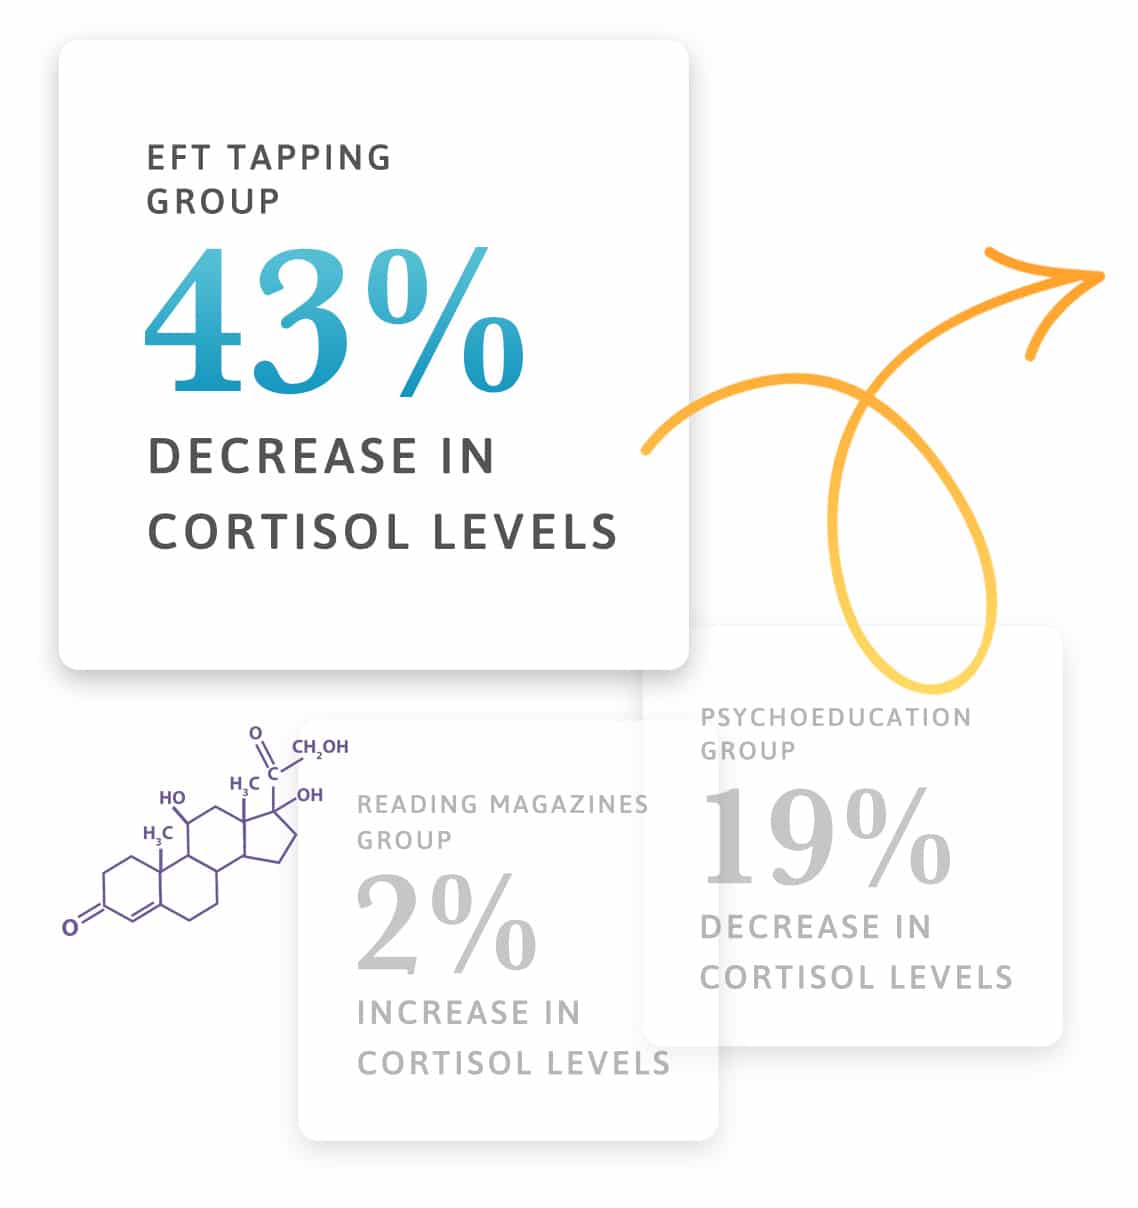 Scientific research findings from EFT Tapping studies showings its effects on cortisol levels